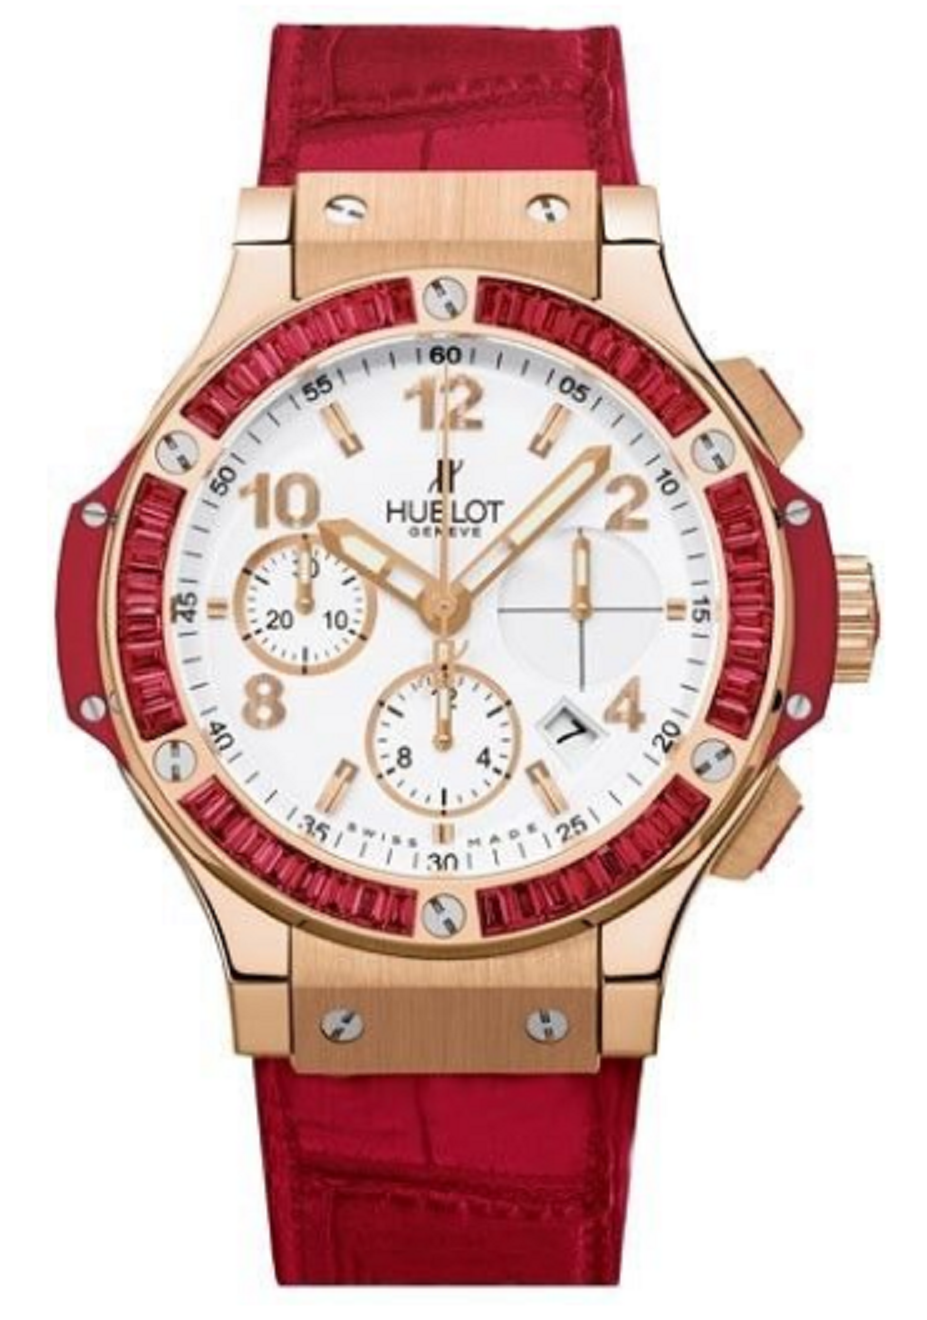 Big Bang Tutti Frutti 41mm in Rose Gold with Spinelle Baguettes Diamond Bezel on Red Leather Strap with White Dial